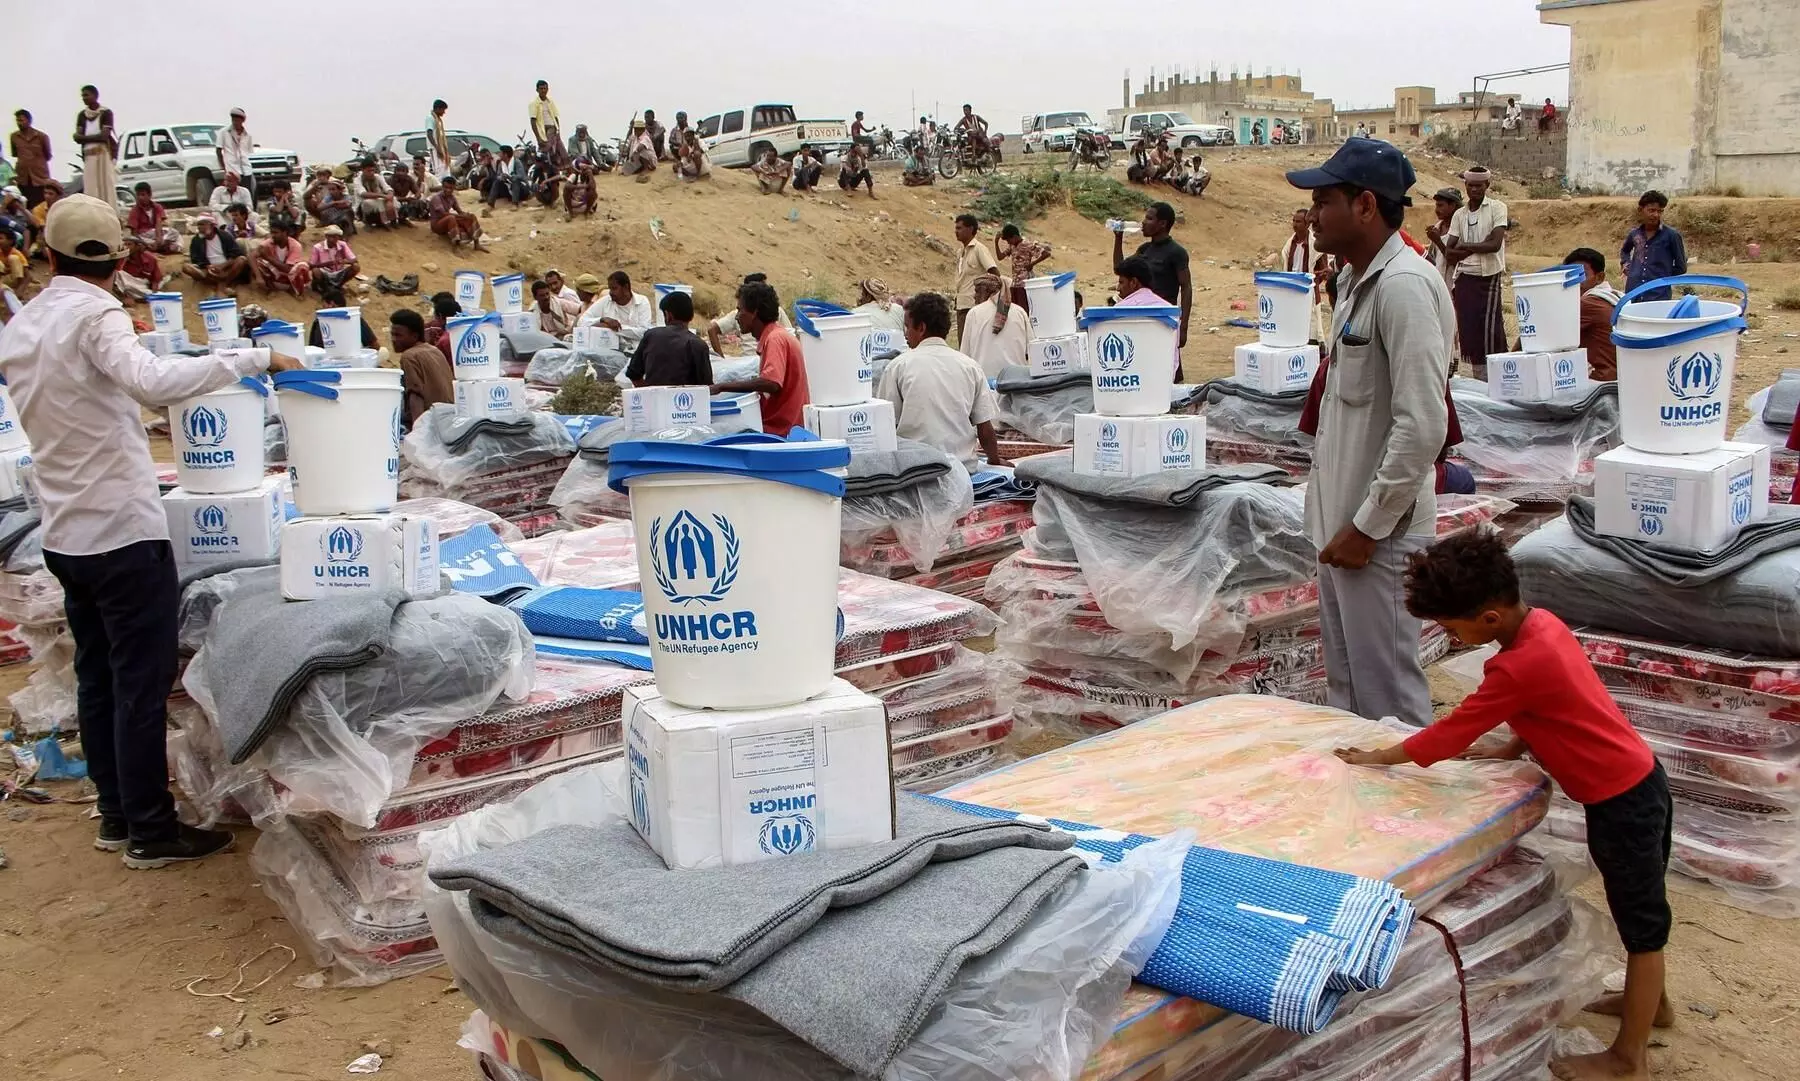 4 million deprived of aid for lack of funds in Yemen